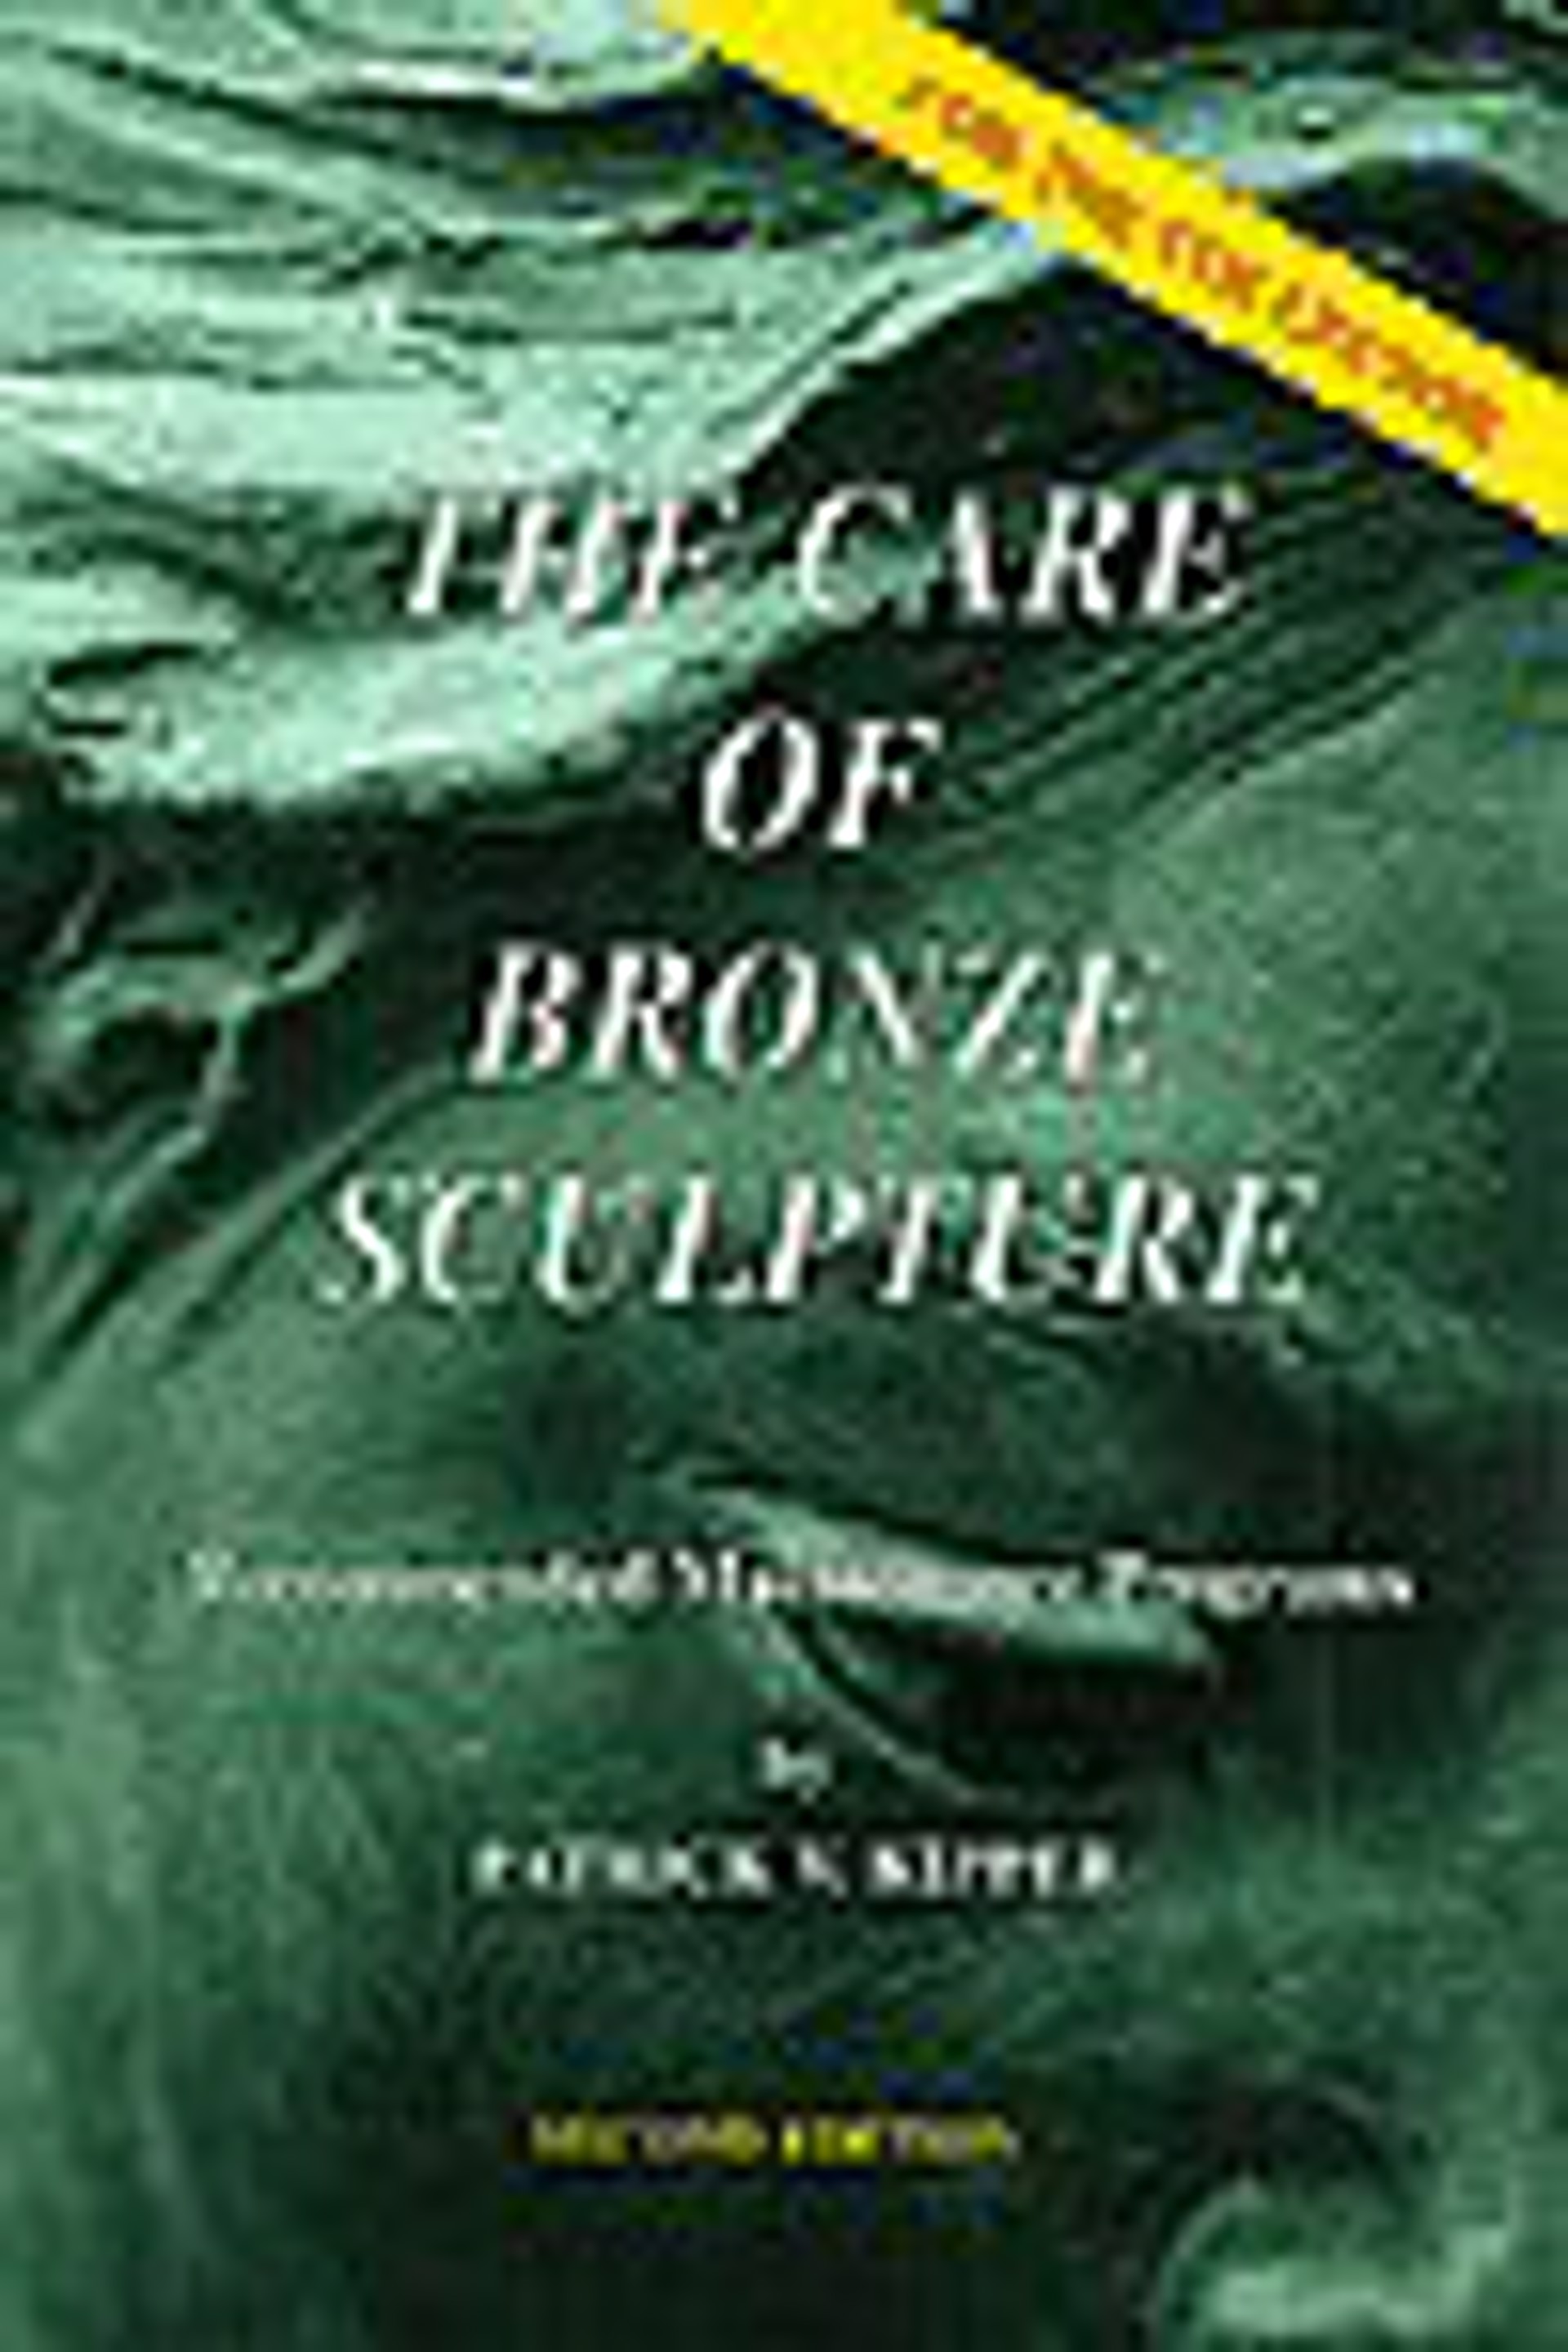 The Care of Bronze Sculpture